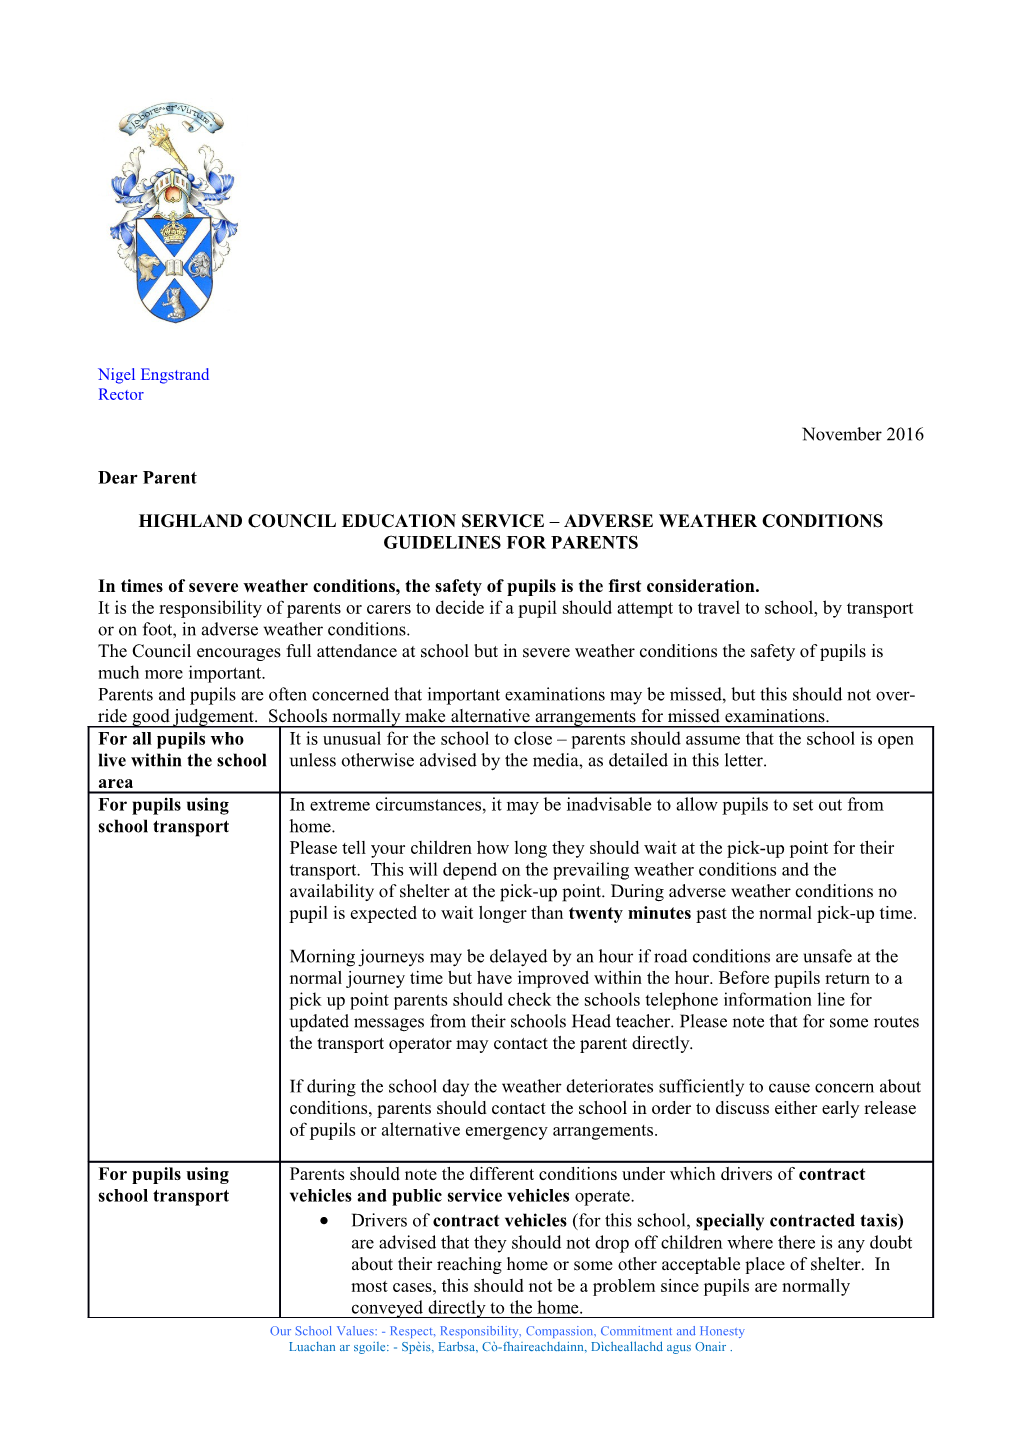 Highland Council Education Service Adverse Weather Conditions